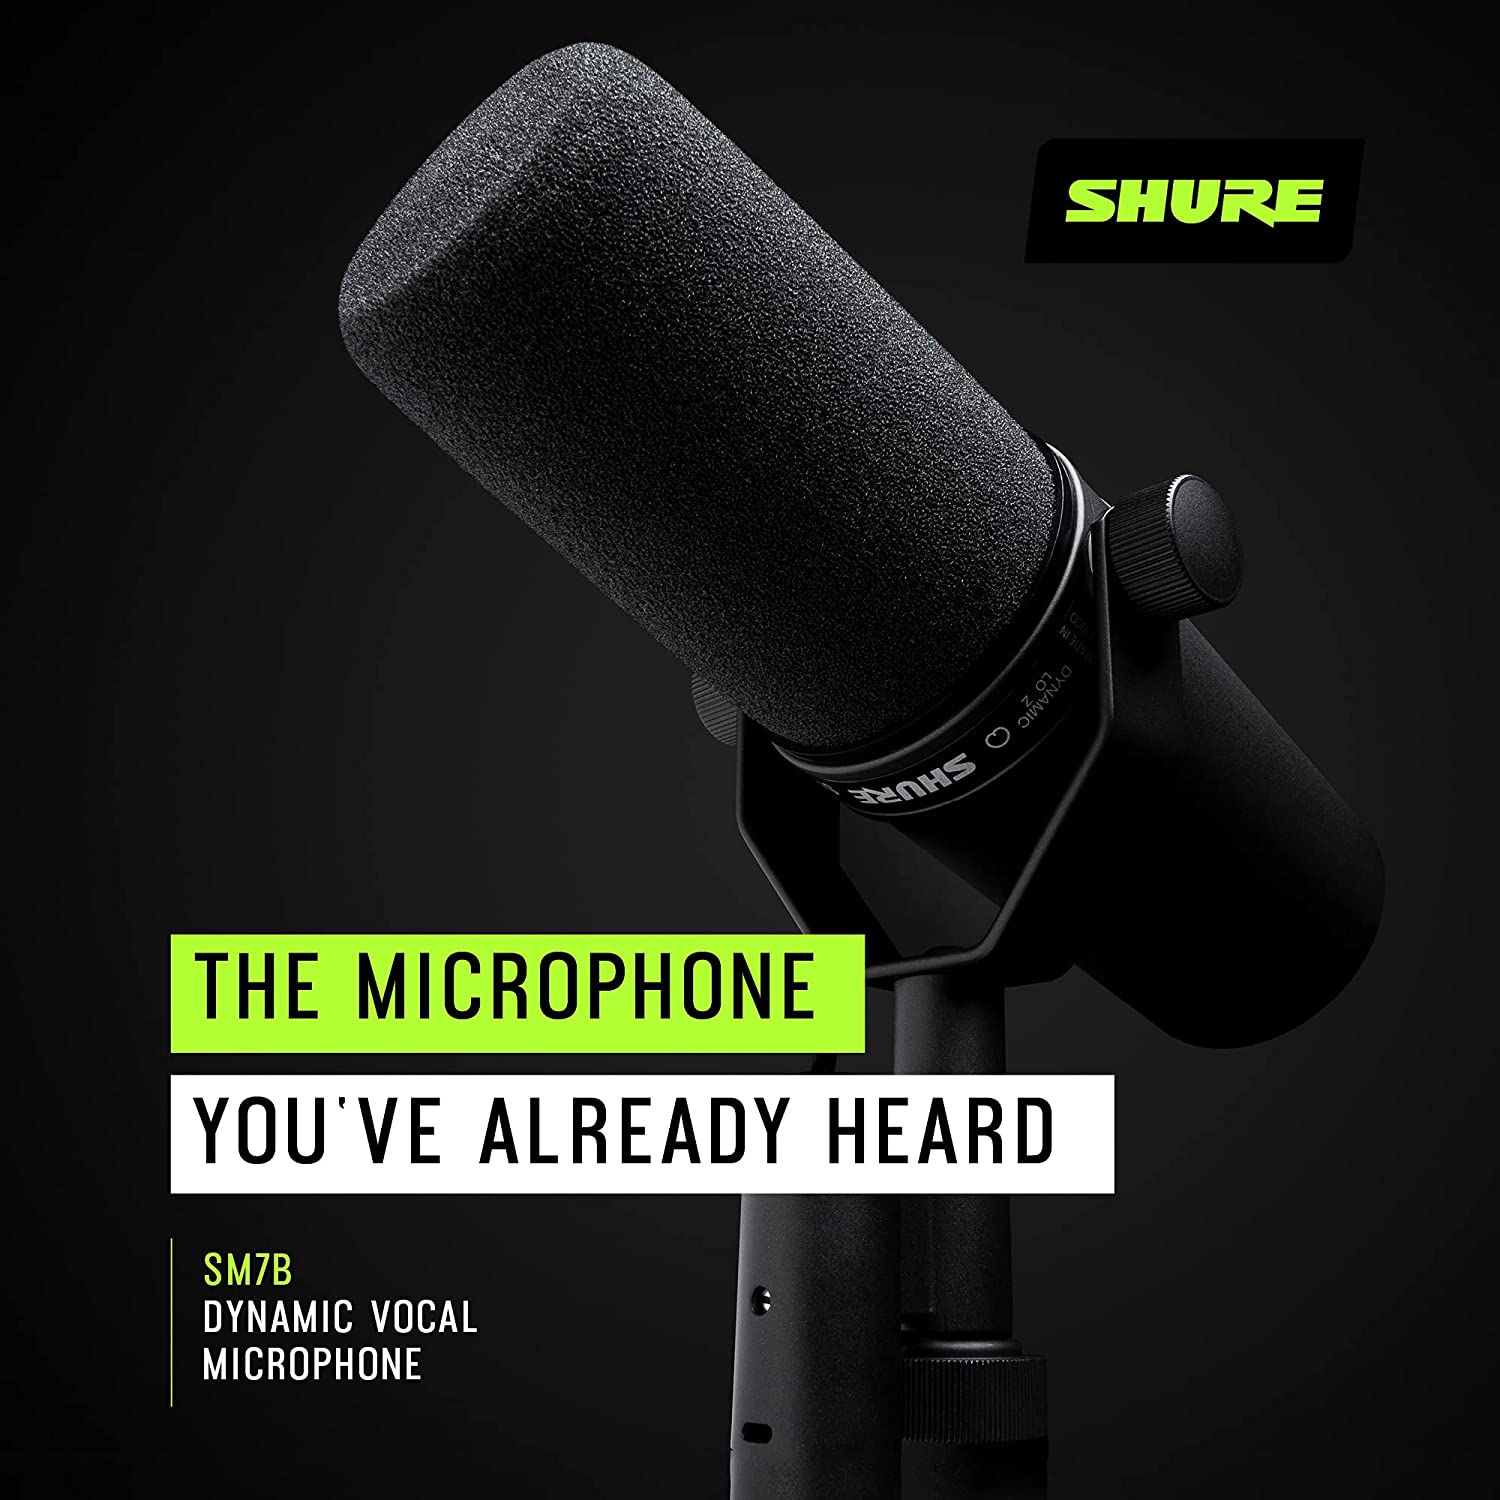 Shure SM7B Vocal Dynamic Microphone for Broadcast, Podcast & Recording, XLR Studio Mic for Music & Speech, Wide-Range Frequency, Warm & Smooth Sound, Rugged Construction, Detachable Windscreen - Black - image 5 of 6